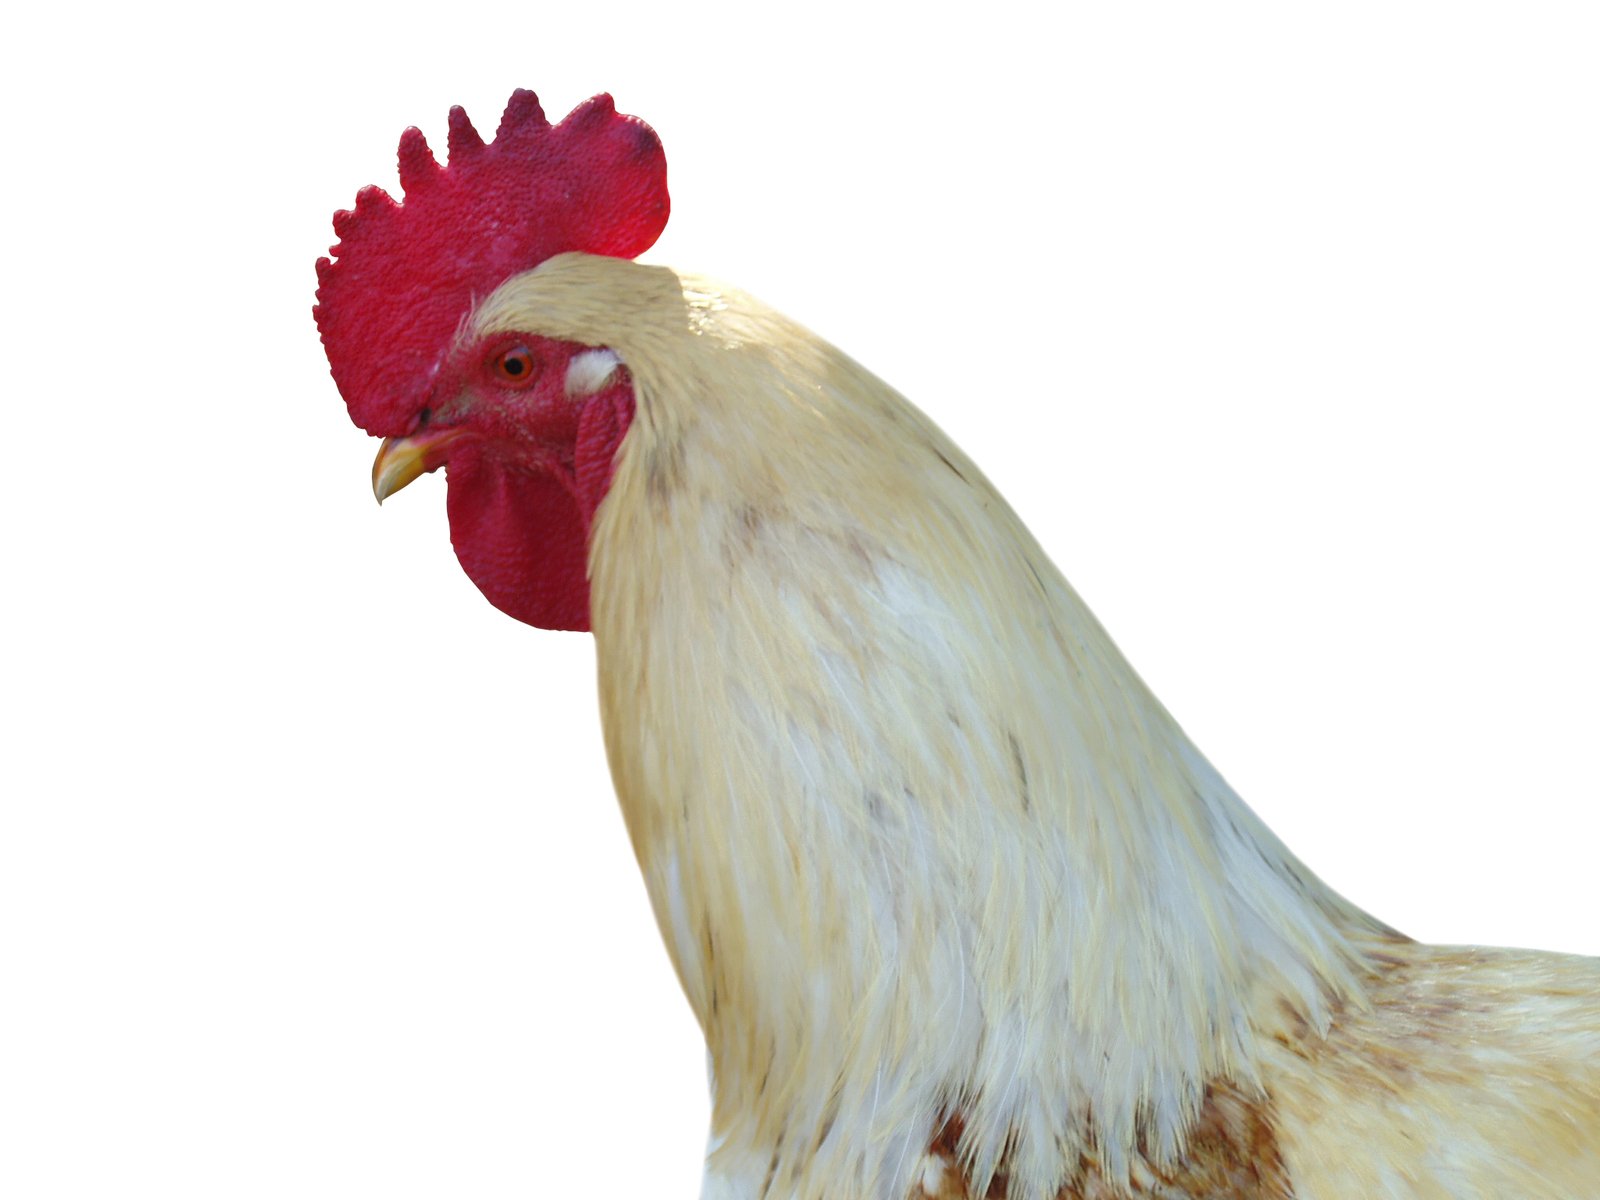 a rooster with large red and white comb